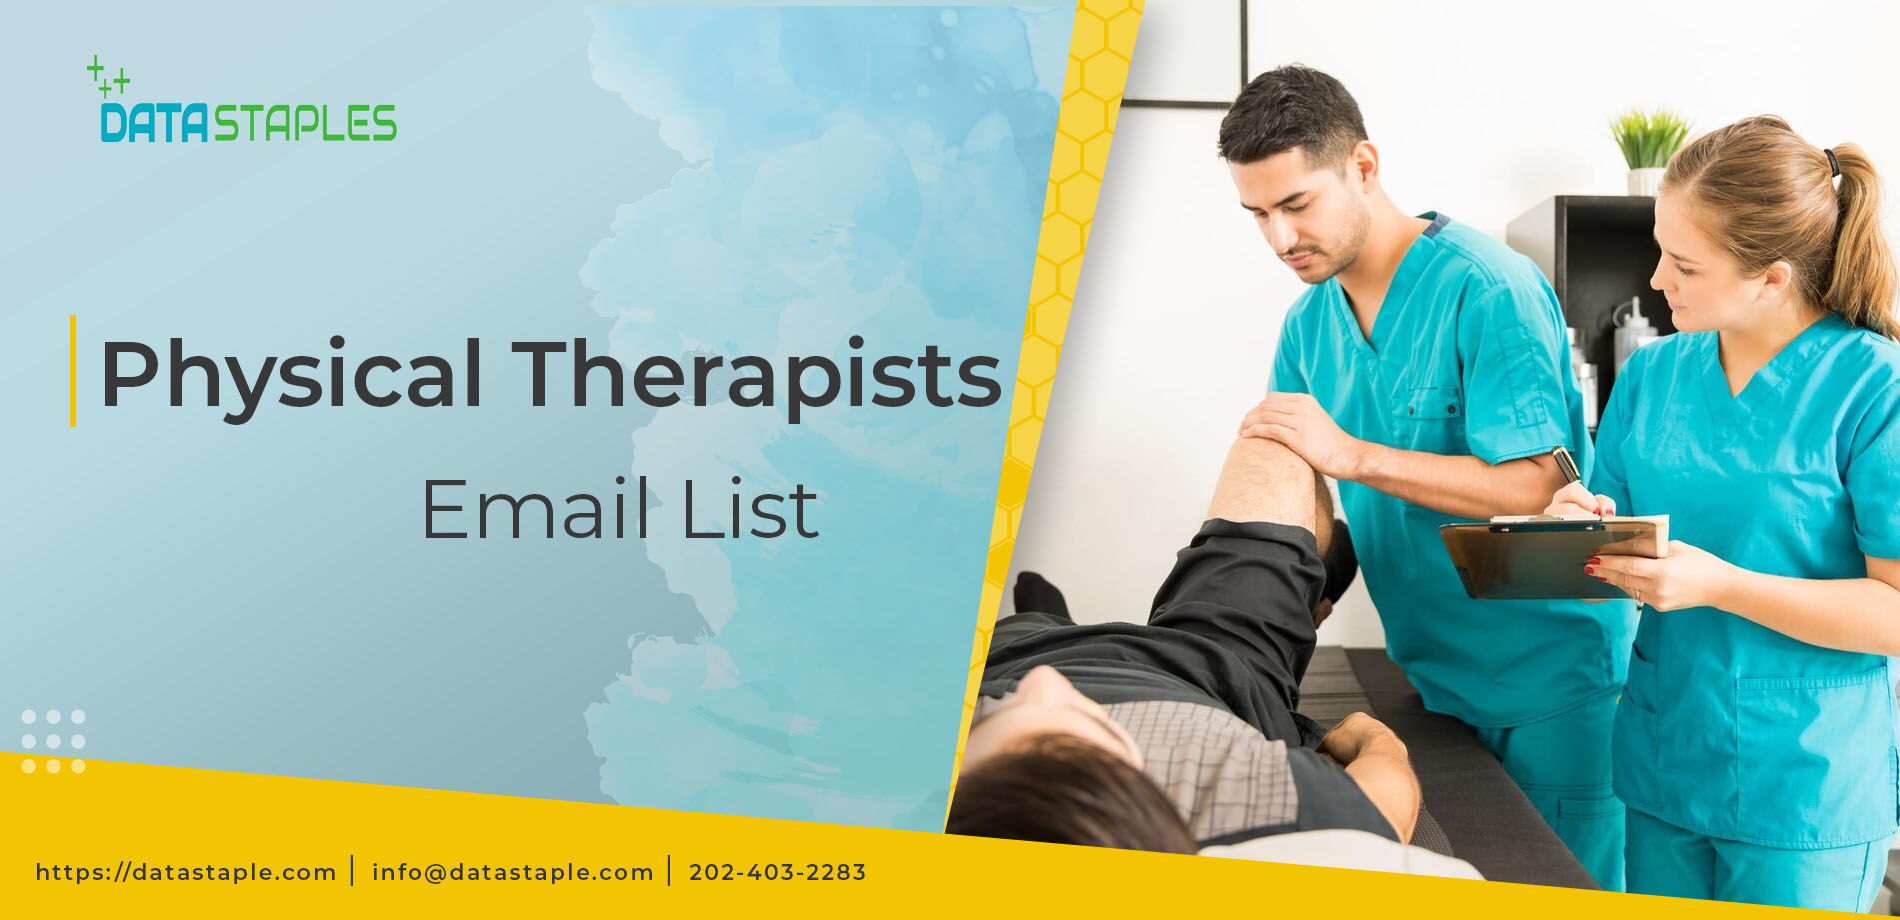 Physical Therapists Email List | DataStaples